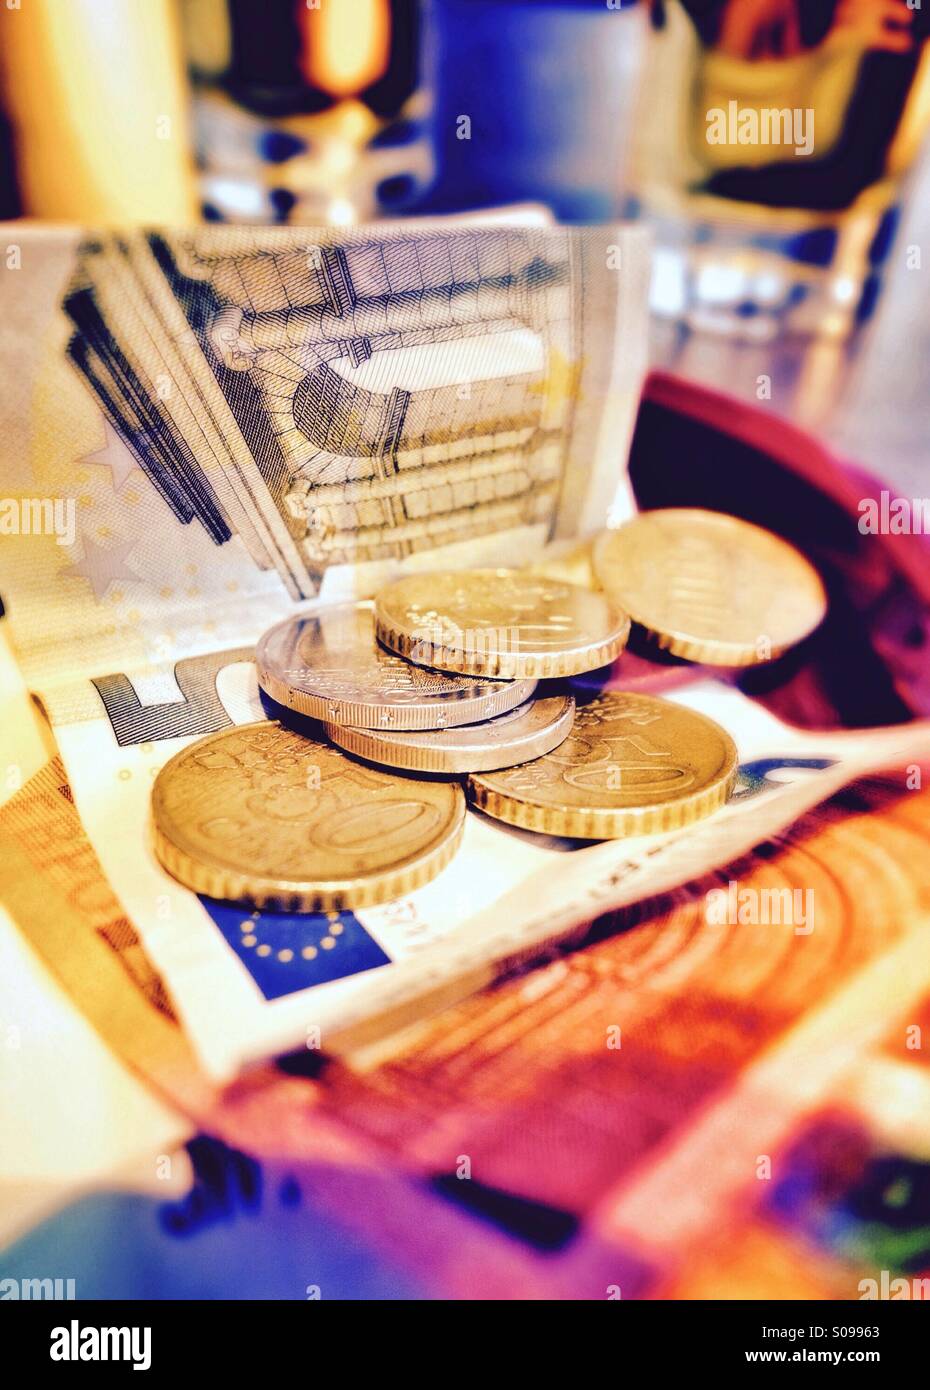 Paying a bill in Euros Stock Photo